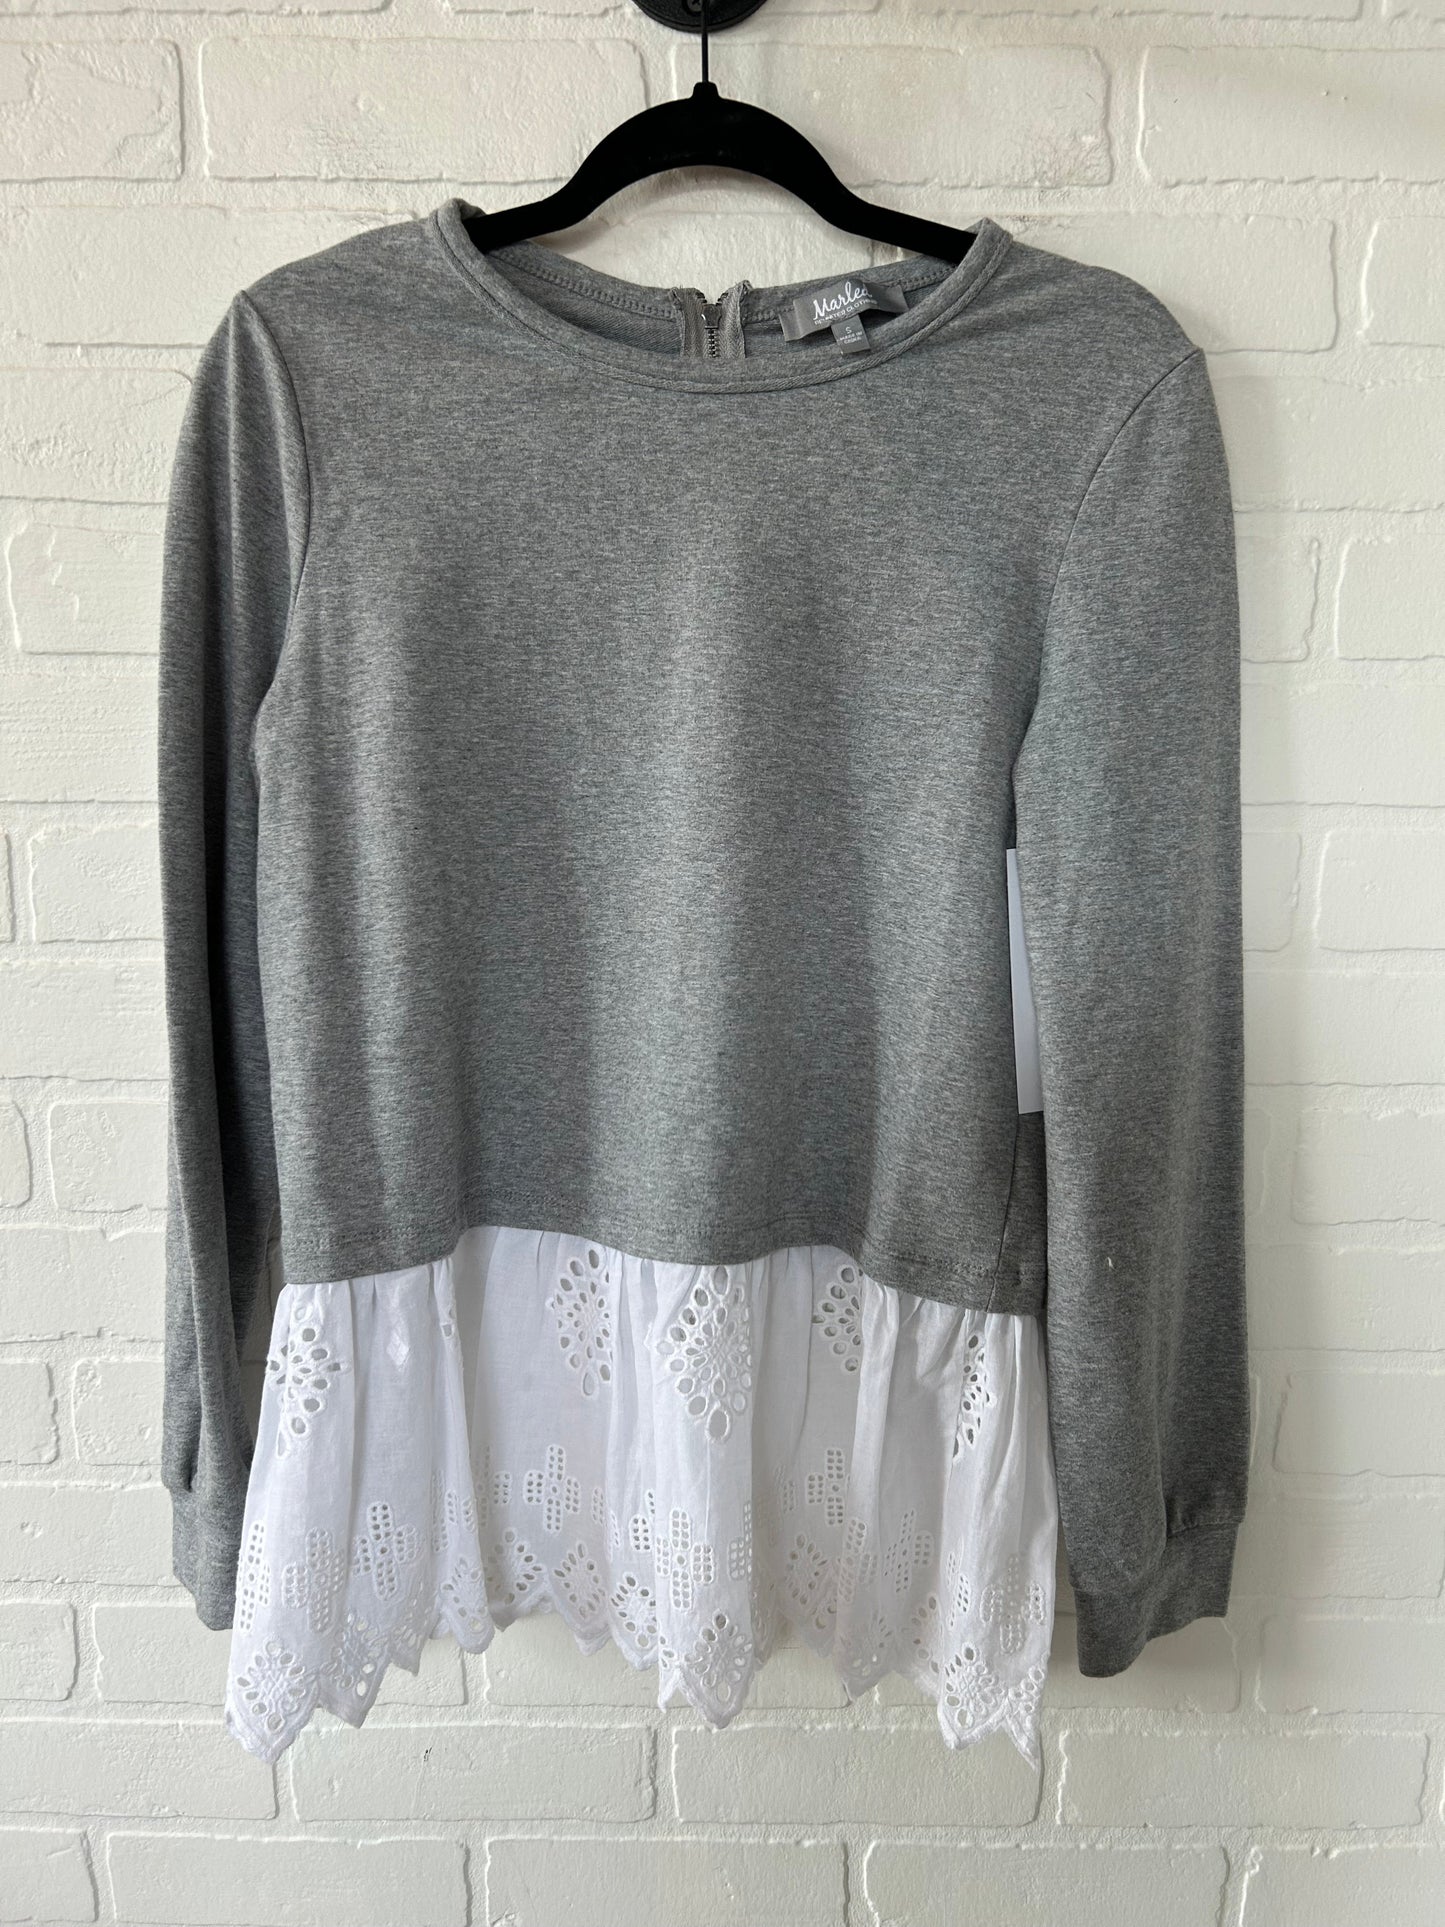 Grey Top Long Sleeve Marled, Size S